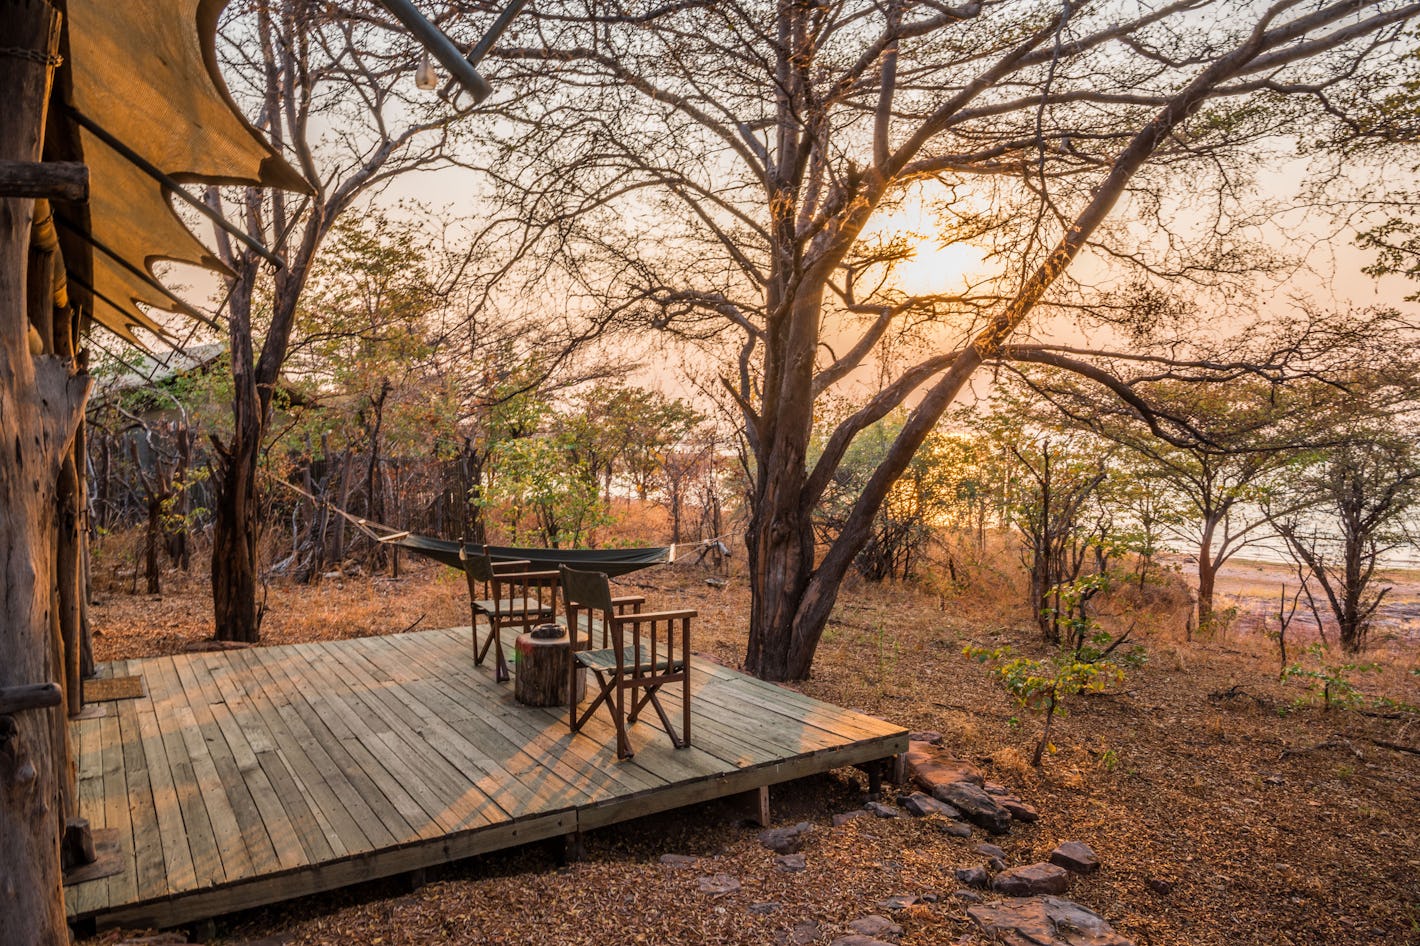 Changa occupies a privileged position on the banks of Lake Kariba, midway between Victoria Falls and Mana Pools National Park, making for an exciting (big game), relaxing stopover between them.